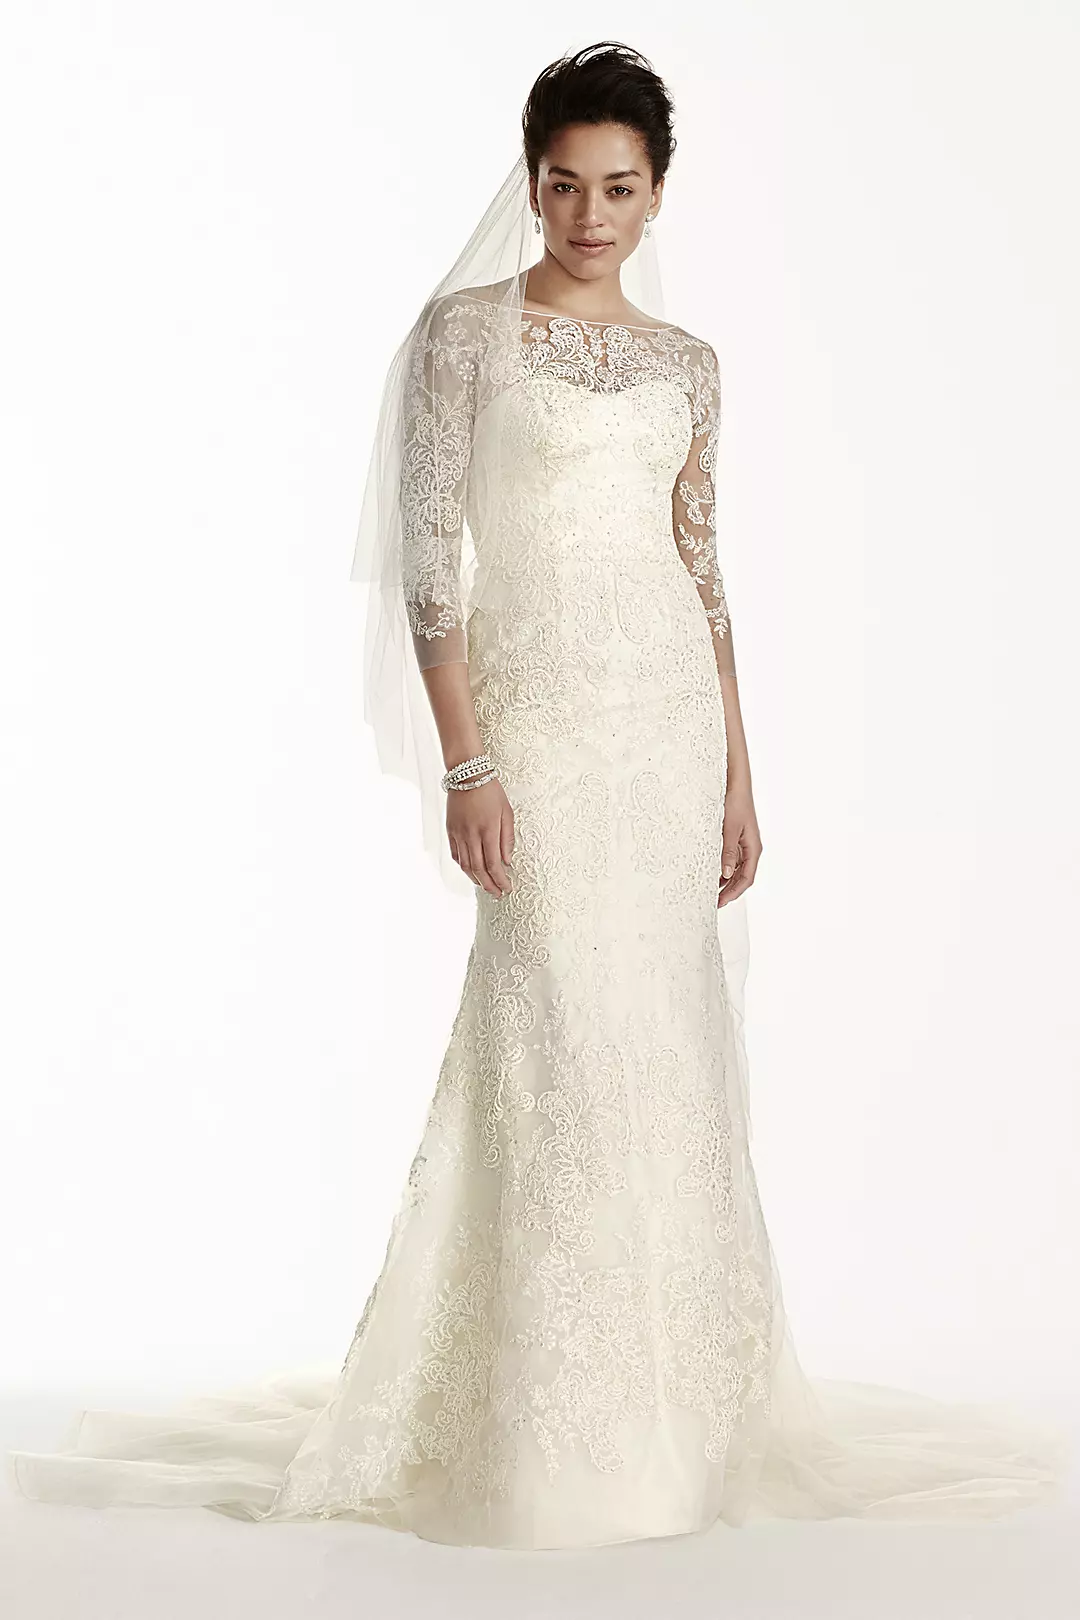 As-Is Tulle Wedding Dress with 3/4 Sleeves Image